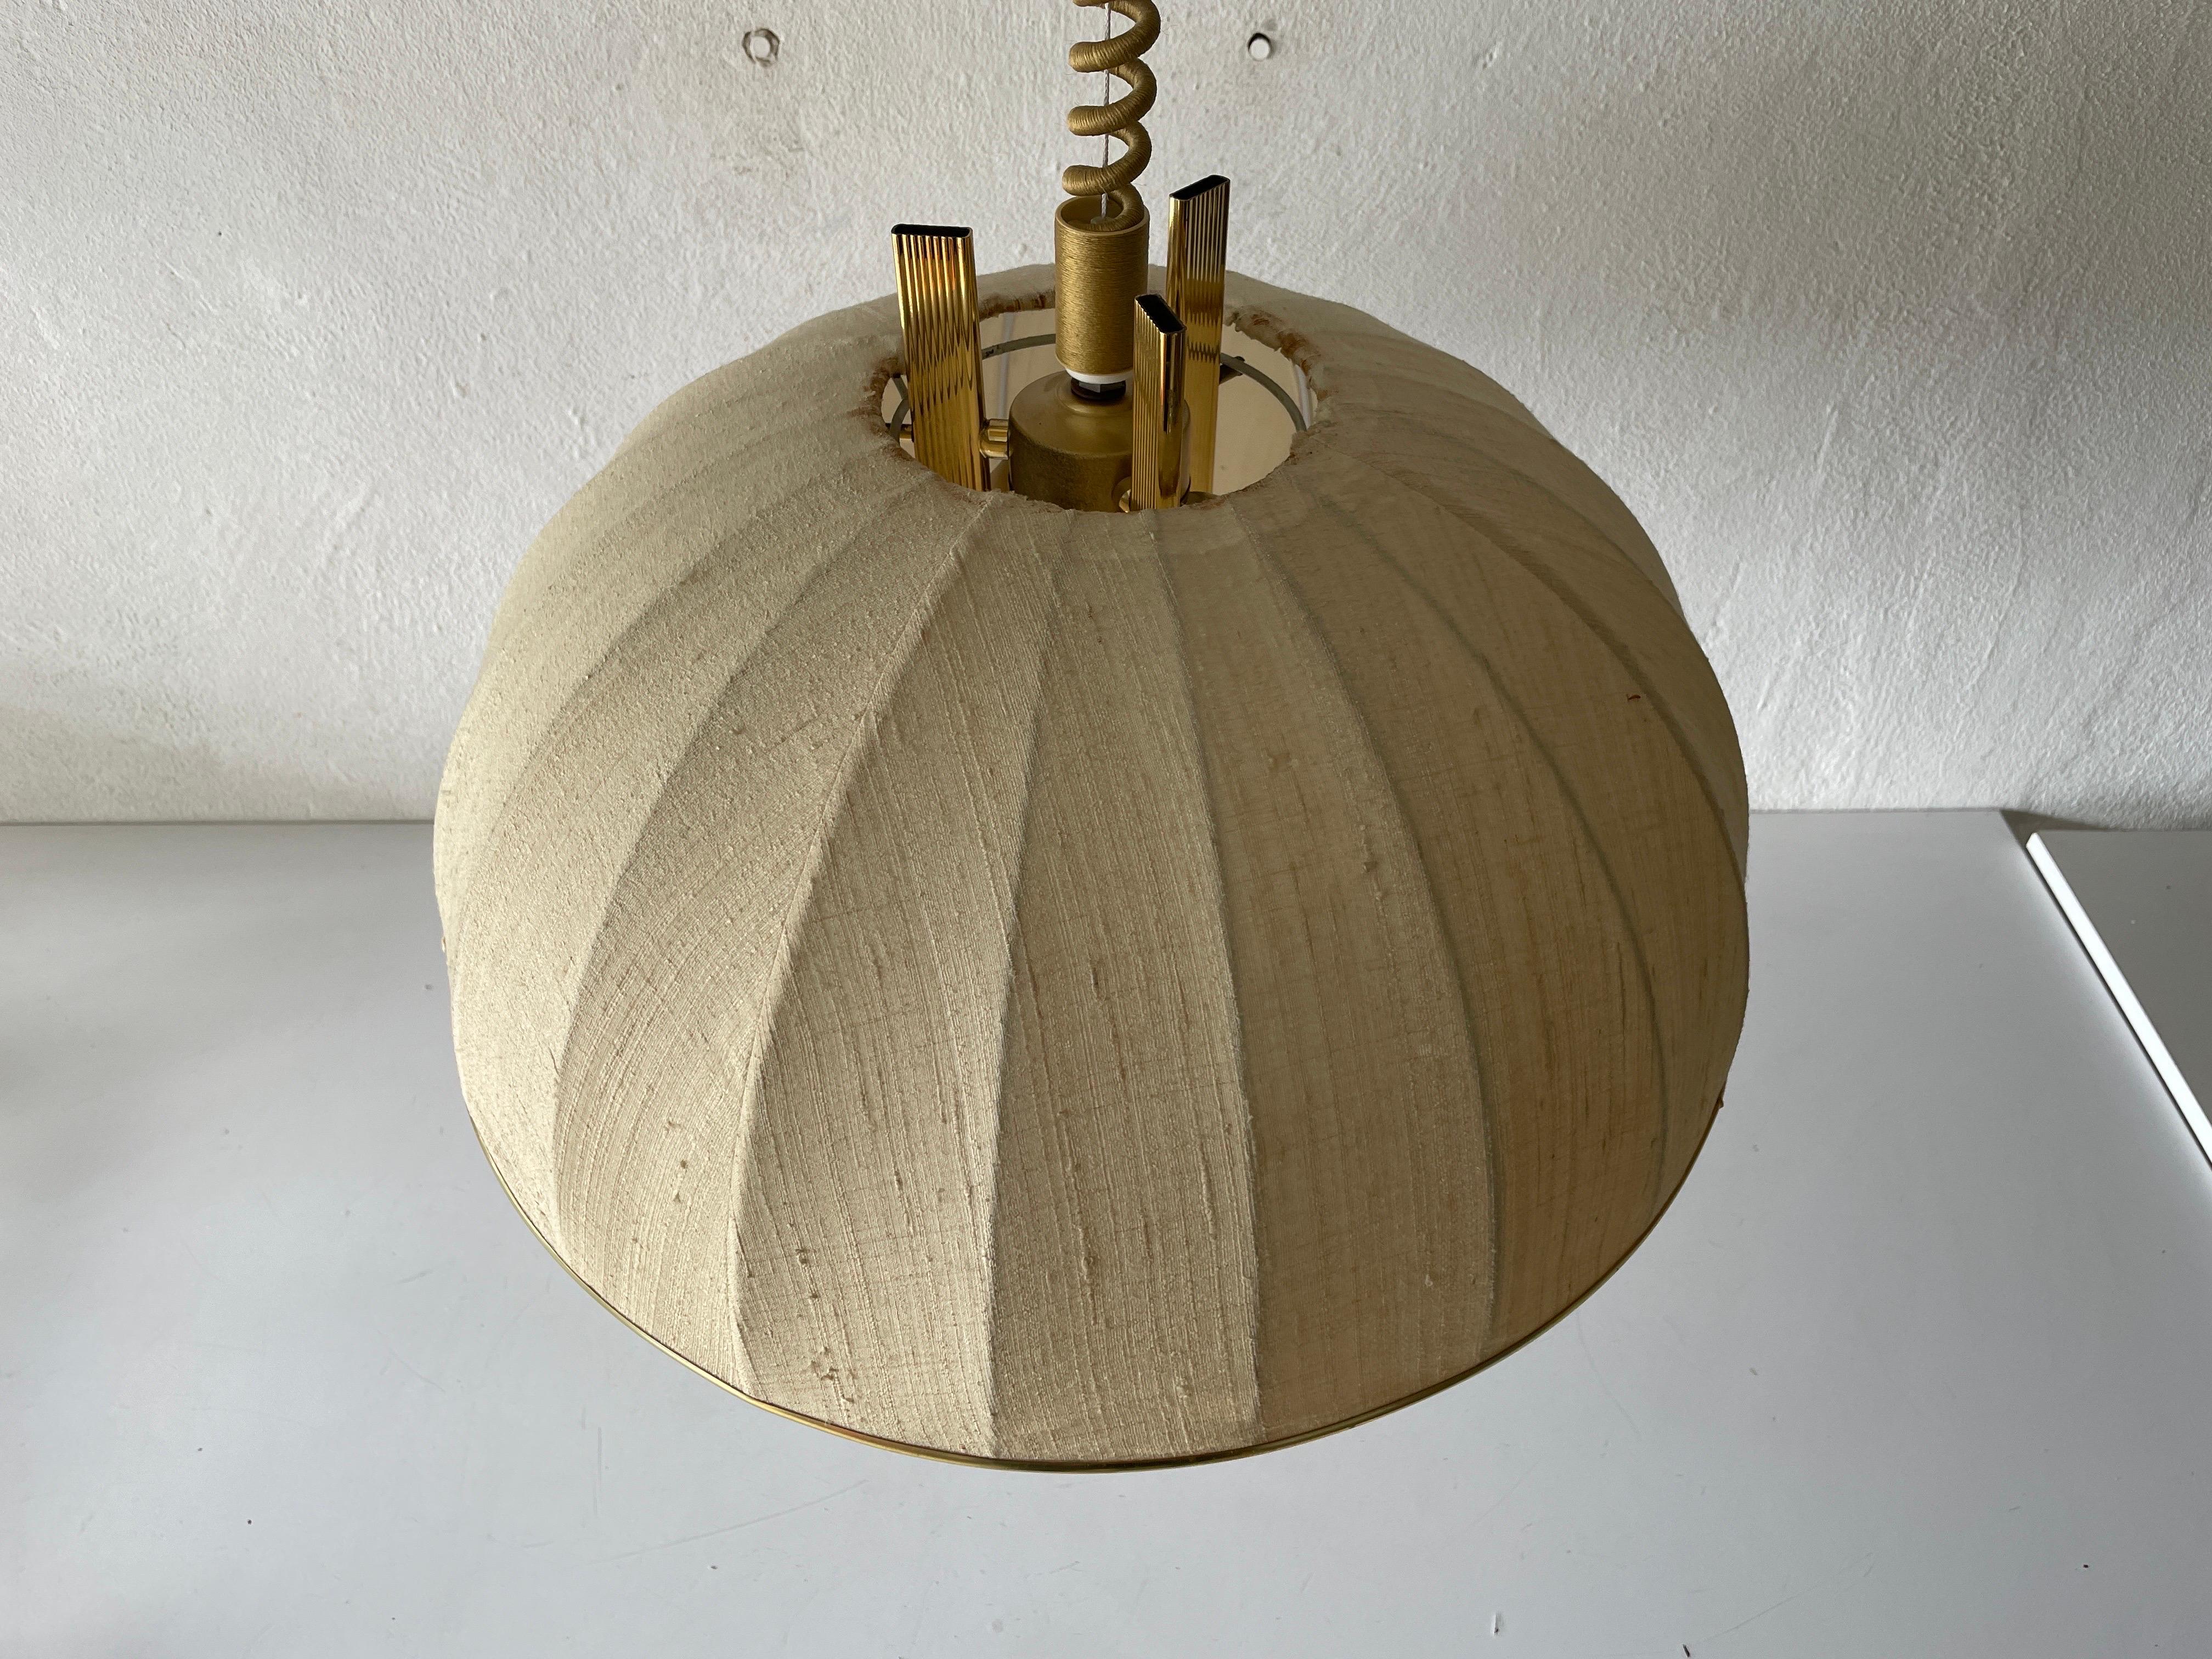 Late 20th Century Brass Body & Fabric Shade Mid-Century Modern Pendant Lamp by Wkr, 1970s, Germany